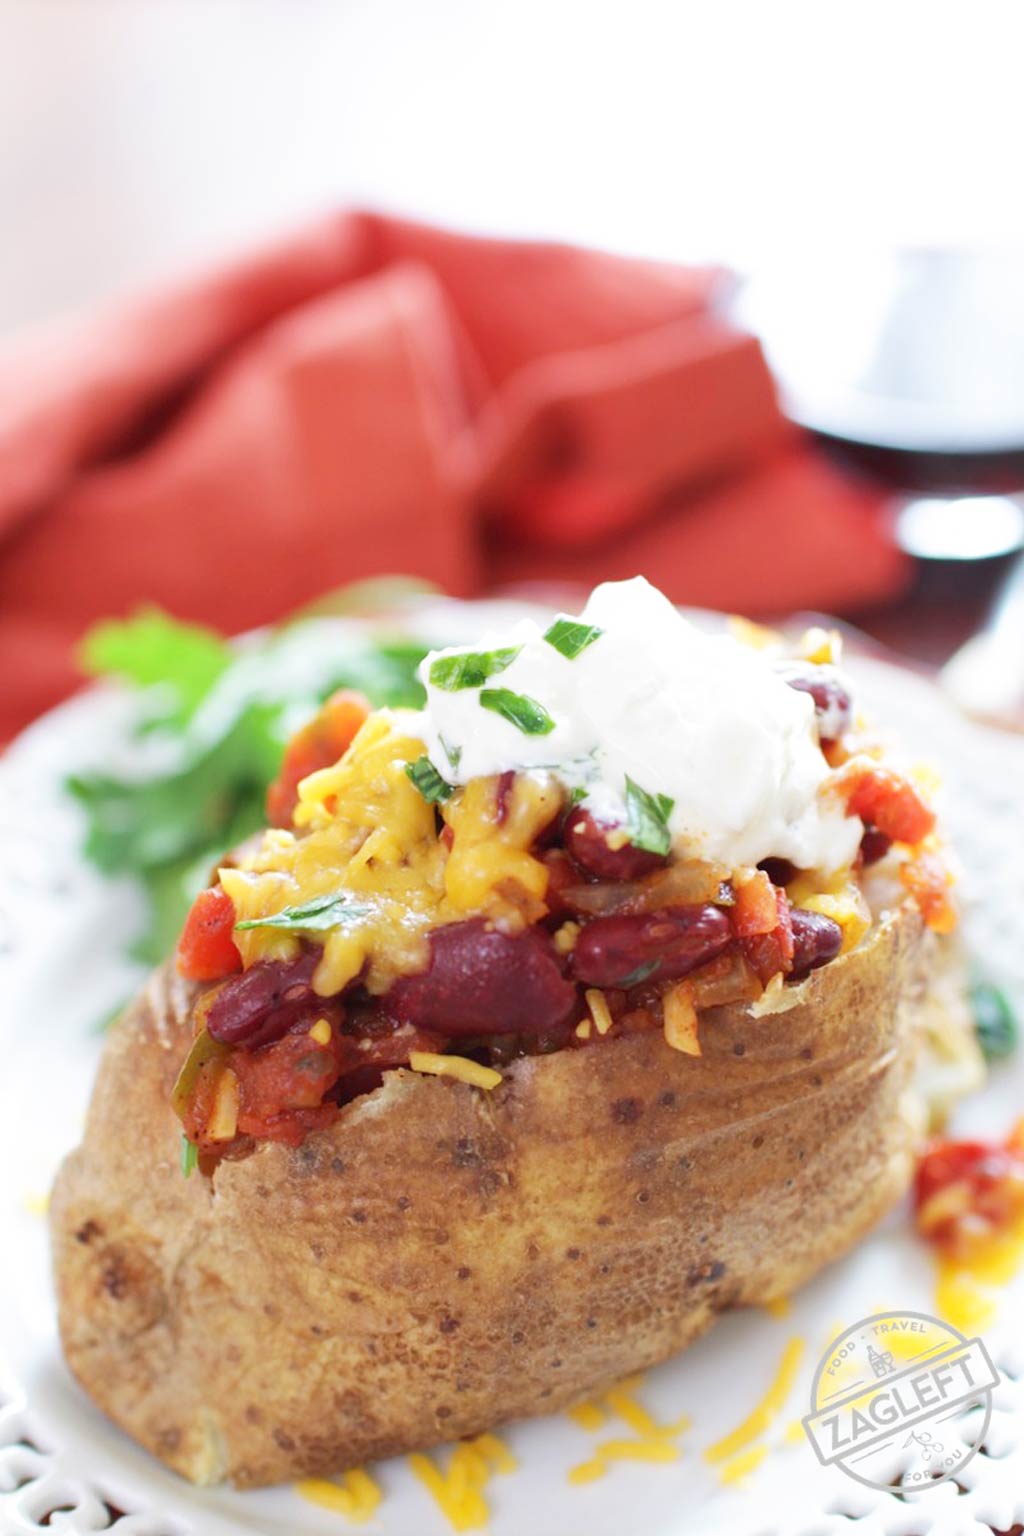 Hearty Baked Potato Recipe With Chili | Single Serving | One Dish Kitchen